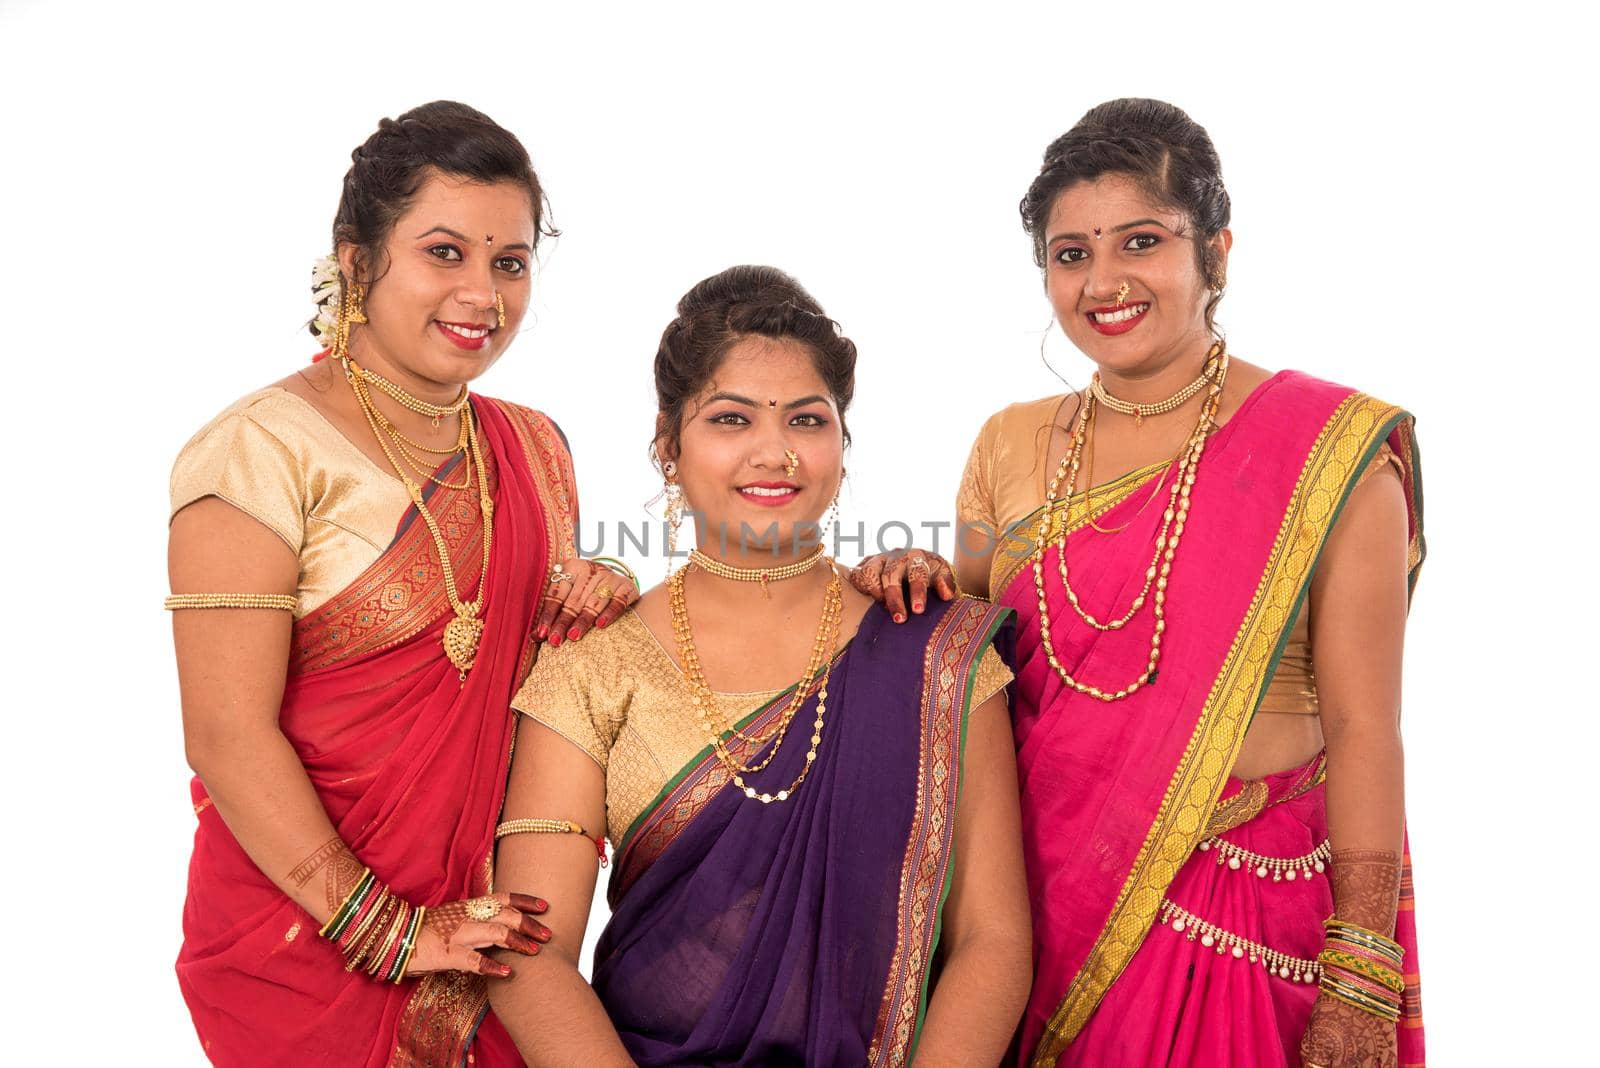 Traditional Beautiful Indian young girls in saree posing on white background